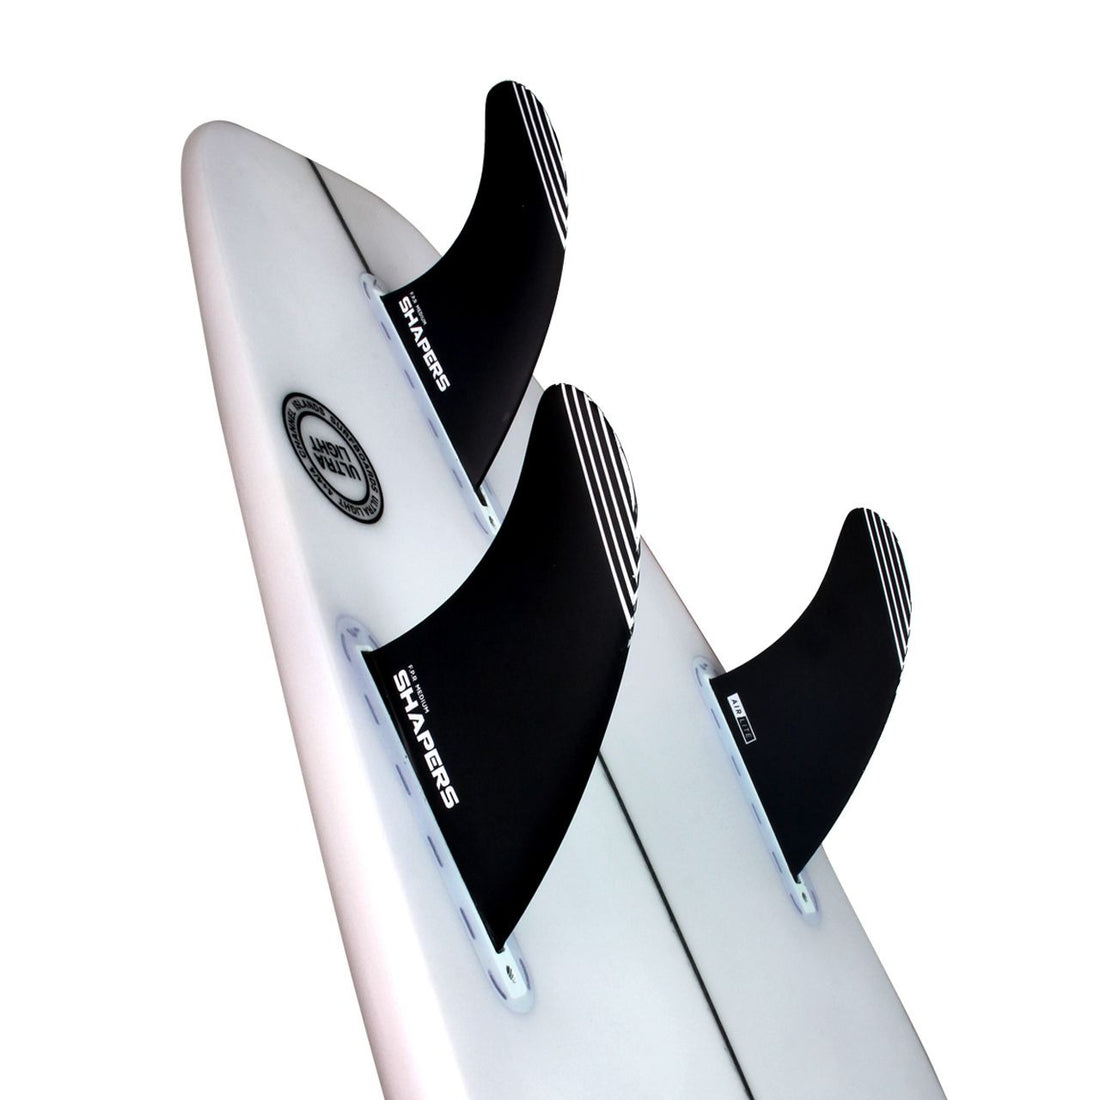 SHAPERS F.P.R. AIRLITE MEDIUM 3-FIN SHAPERS 2 TAB